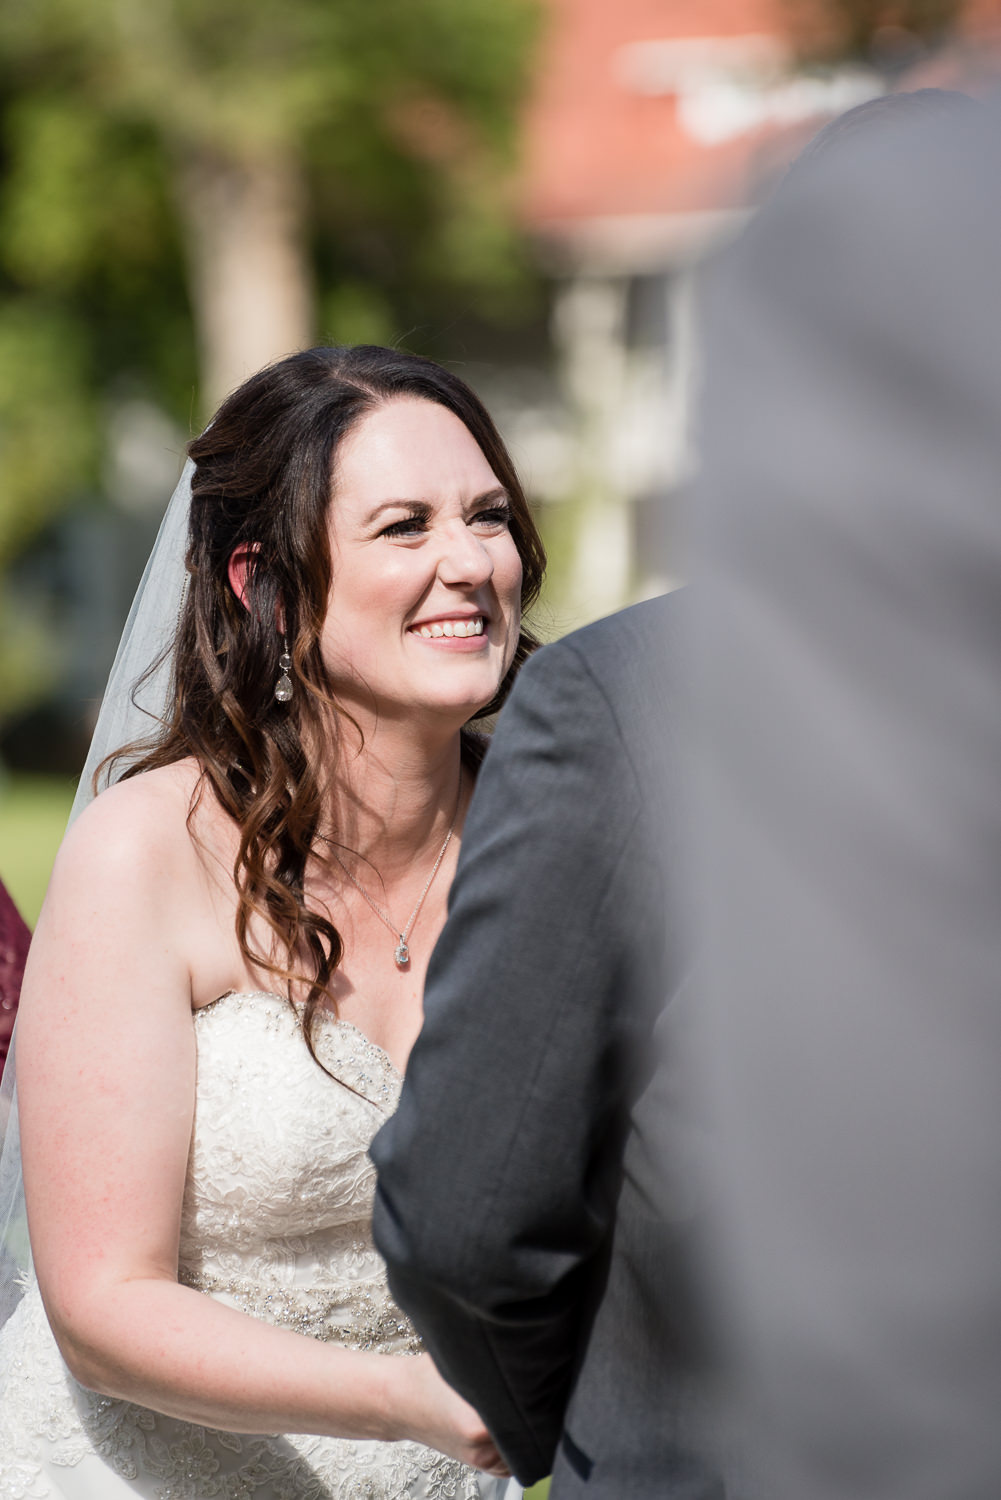 heritage-hall-missoula-montana-bride-laughing-during-ceremony.jpg